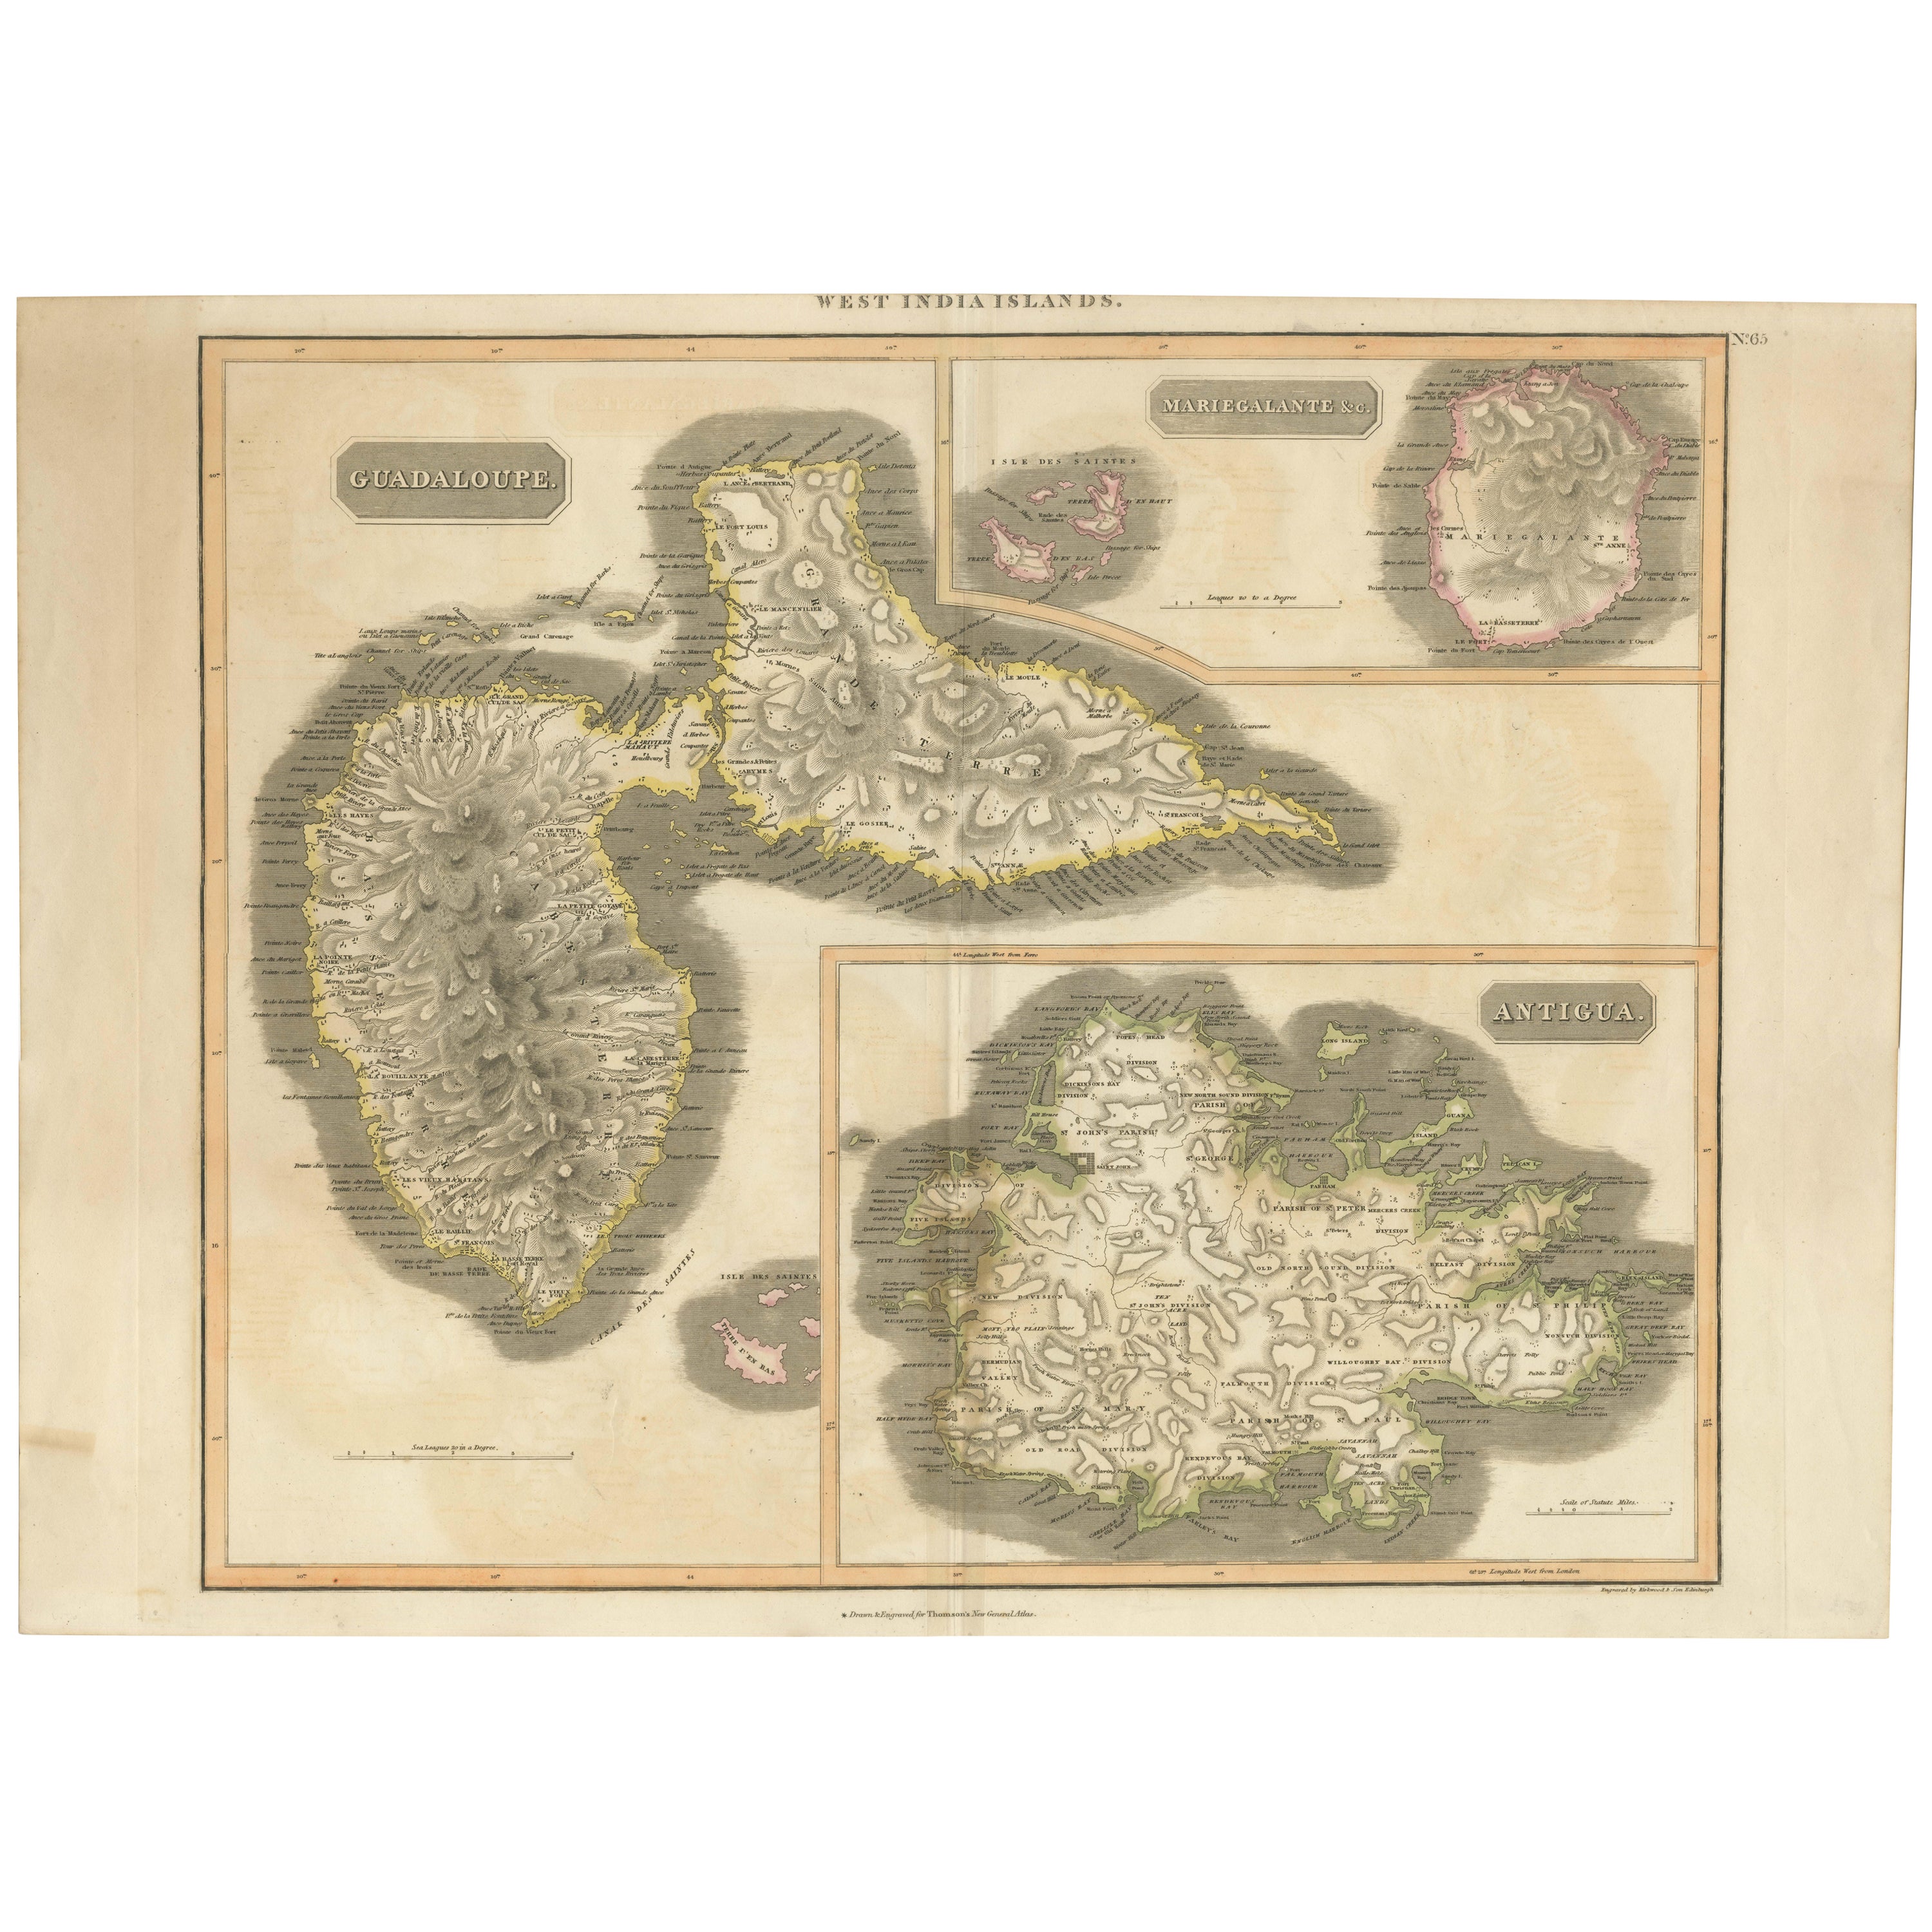 Large Antique Map of Guadeloupe and Antigua with Adjacent Isles, 19th Century